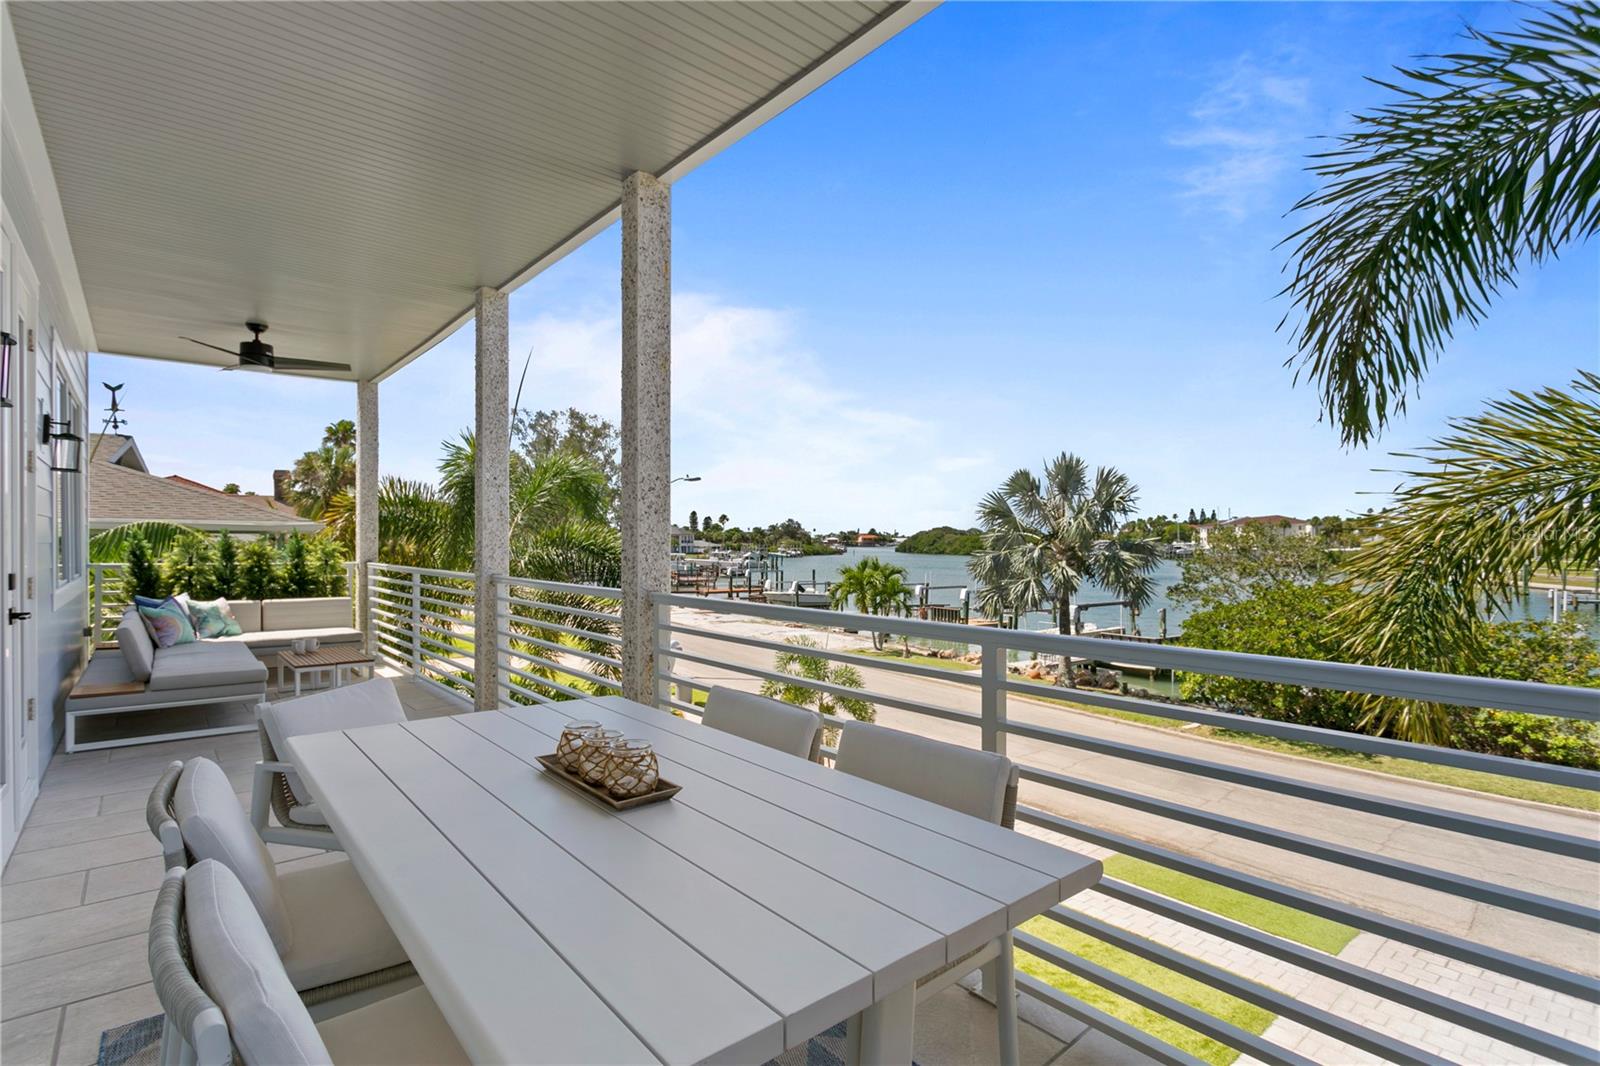 The 2nd and 3rd level balconies span the entire front of the home, giving your plenty of views